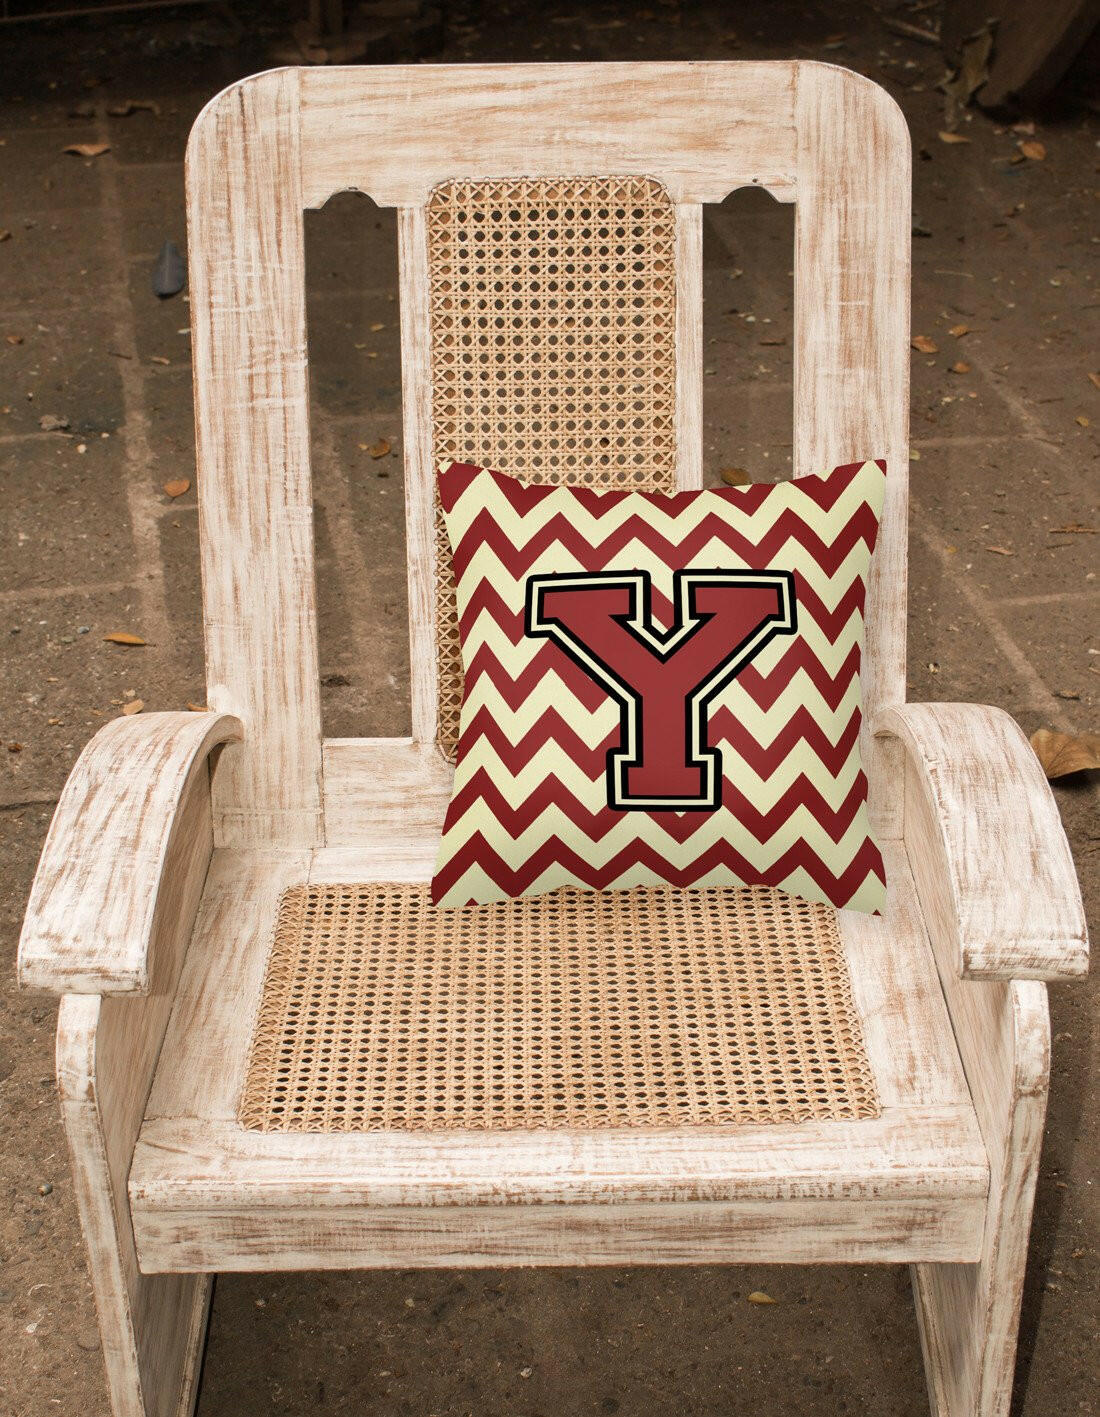 Letter Y Chevron Maroon and Gold Fabric Decorative Pillow CJ1061-YPW1414 by Caroline's Treasures